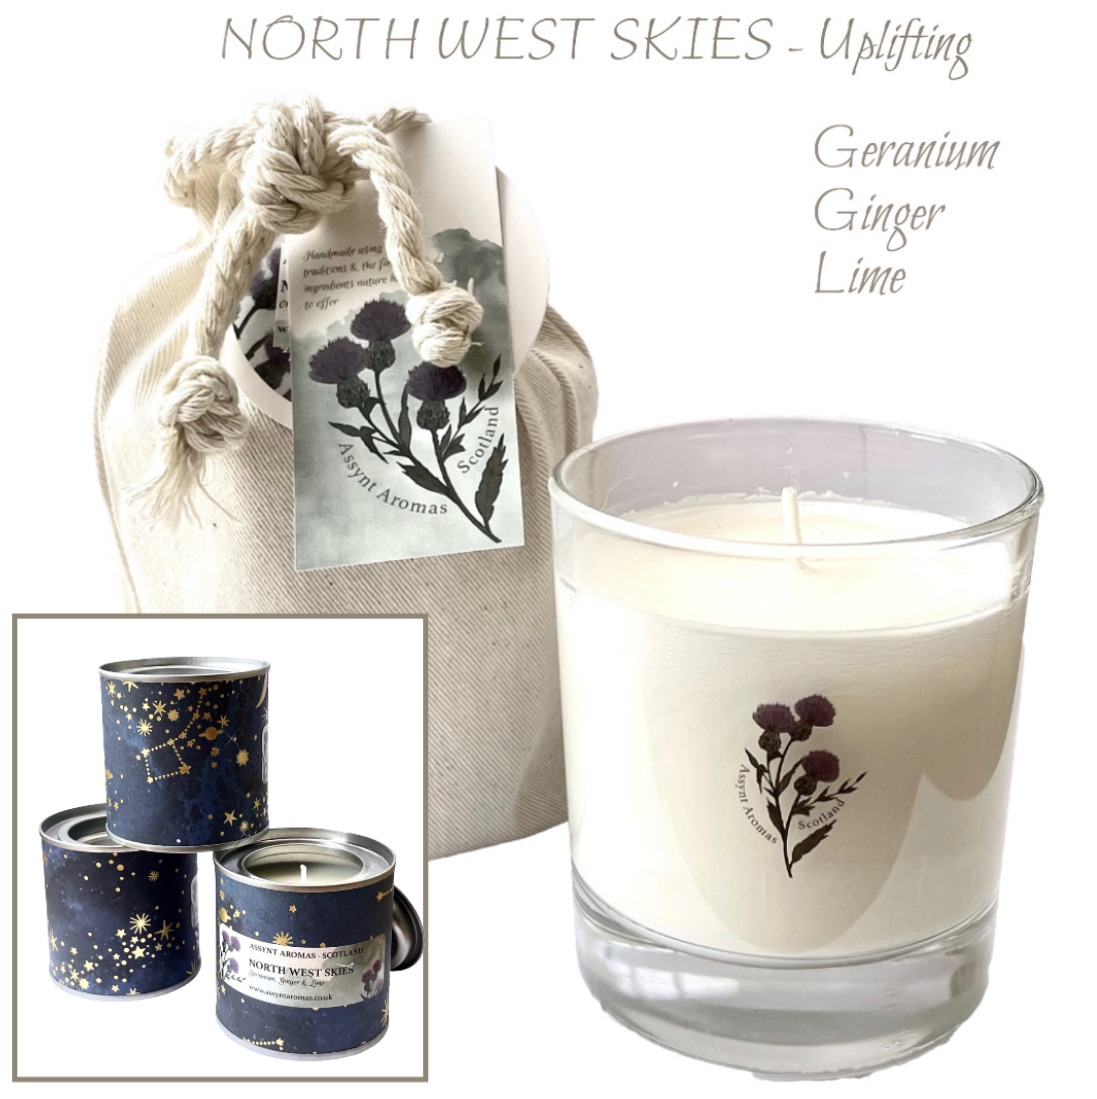 NORTH WEST SKIES - natural essence aromatherapy plant wax candle with essen